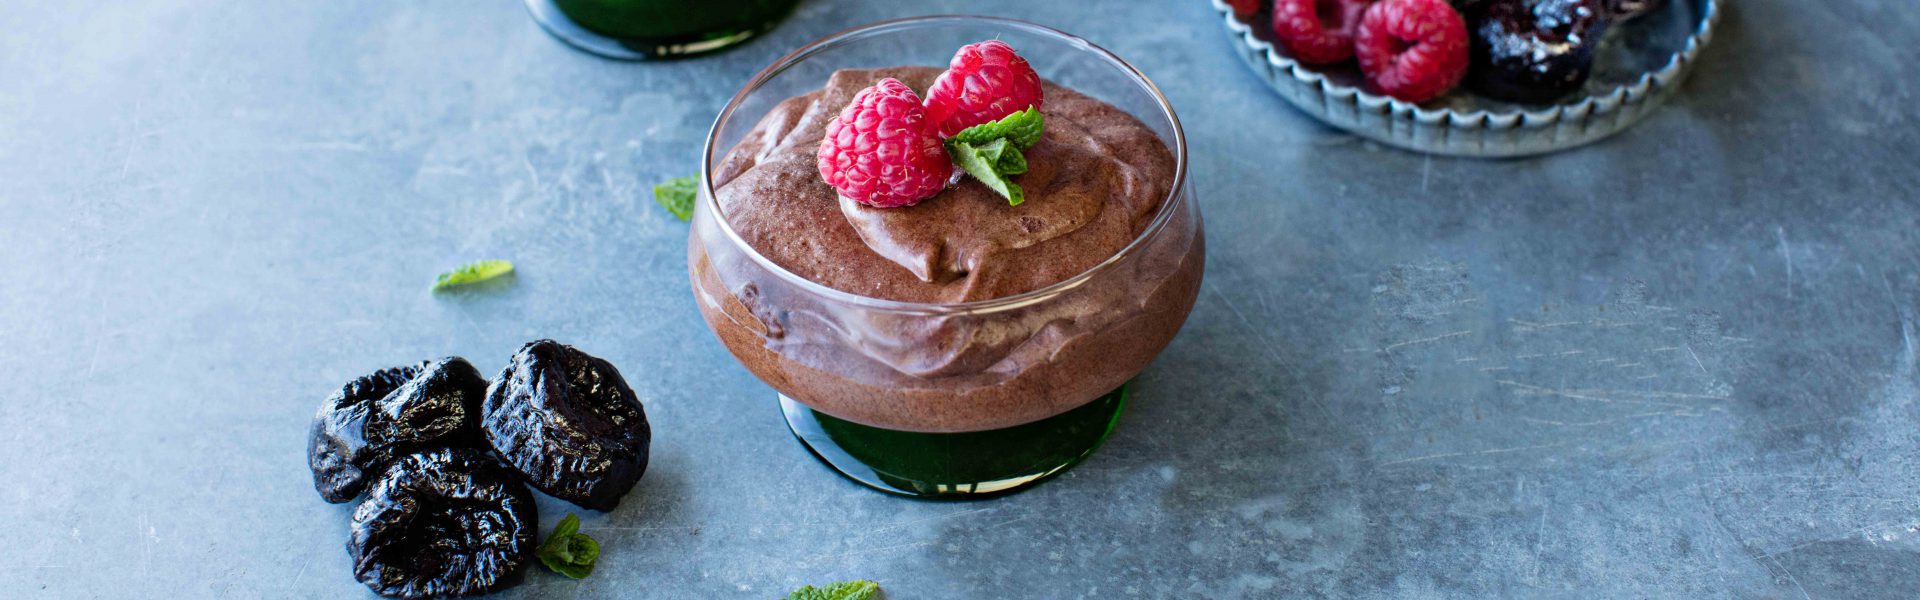 This mousse is sweetened with prunes and flavored with a hint of coffee and cardamom.